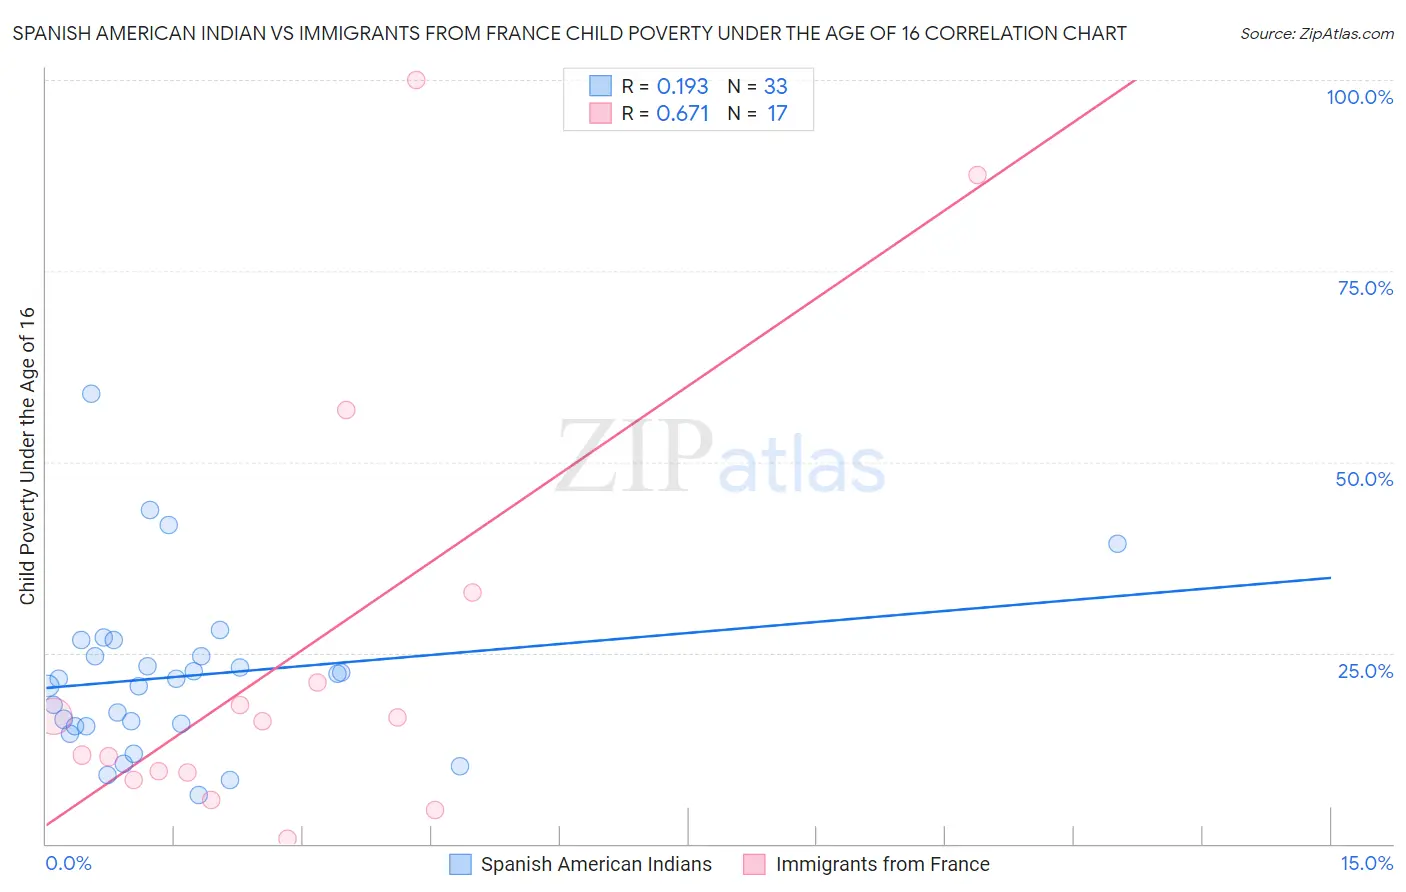 Spanish American Indian vs Immigrants from France Child Poverty Under the Age of 16